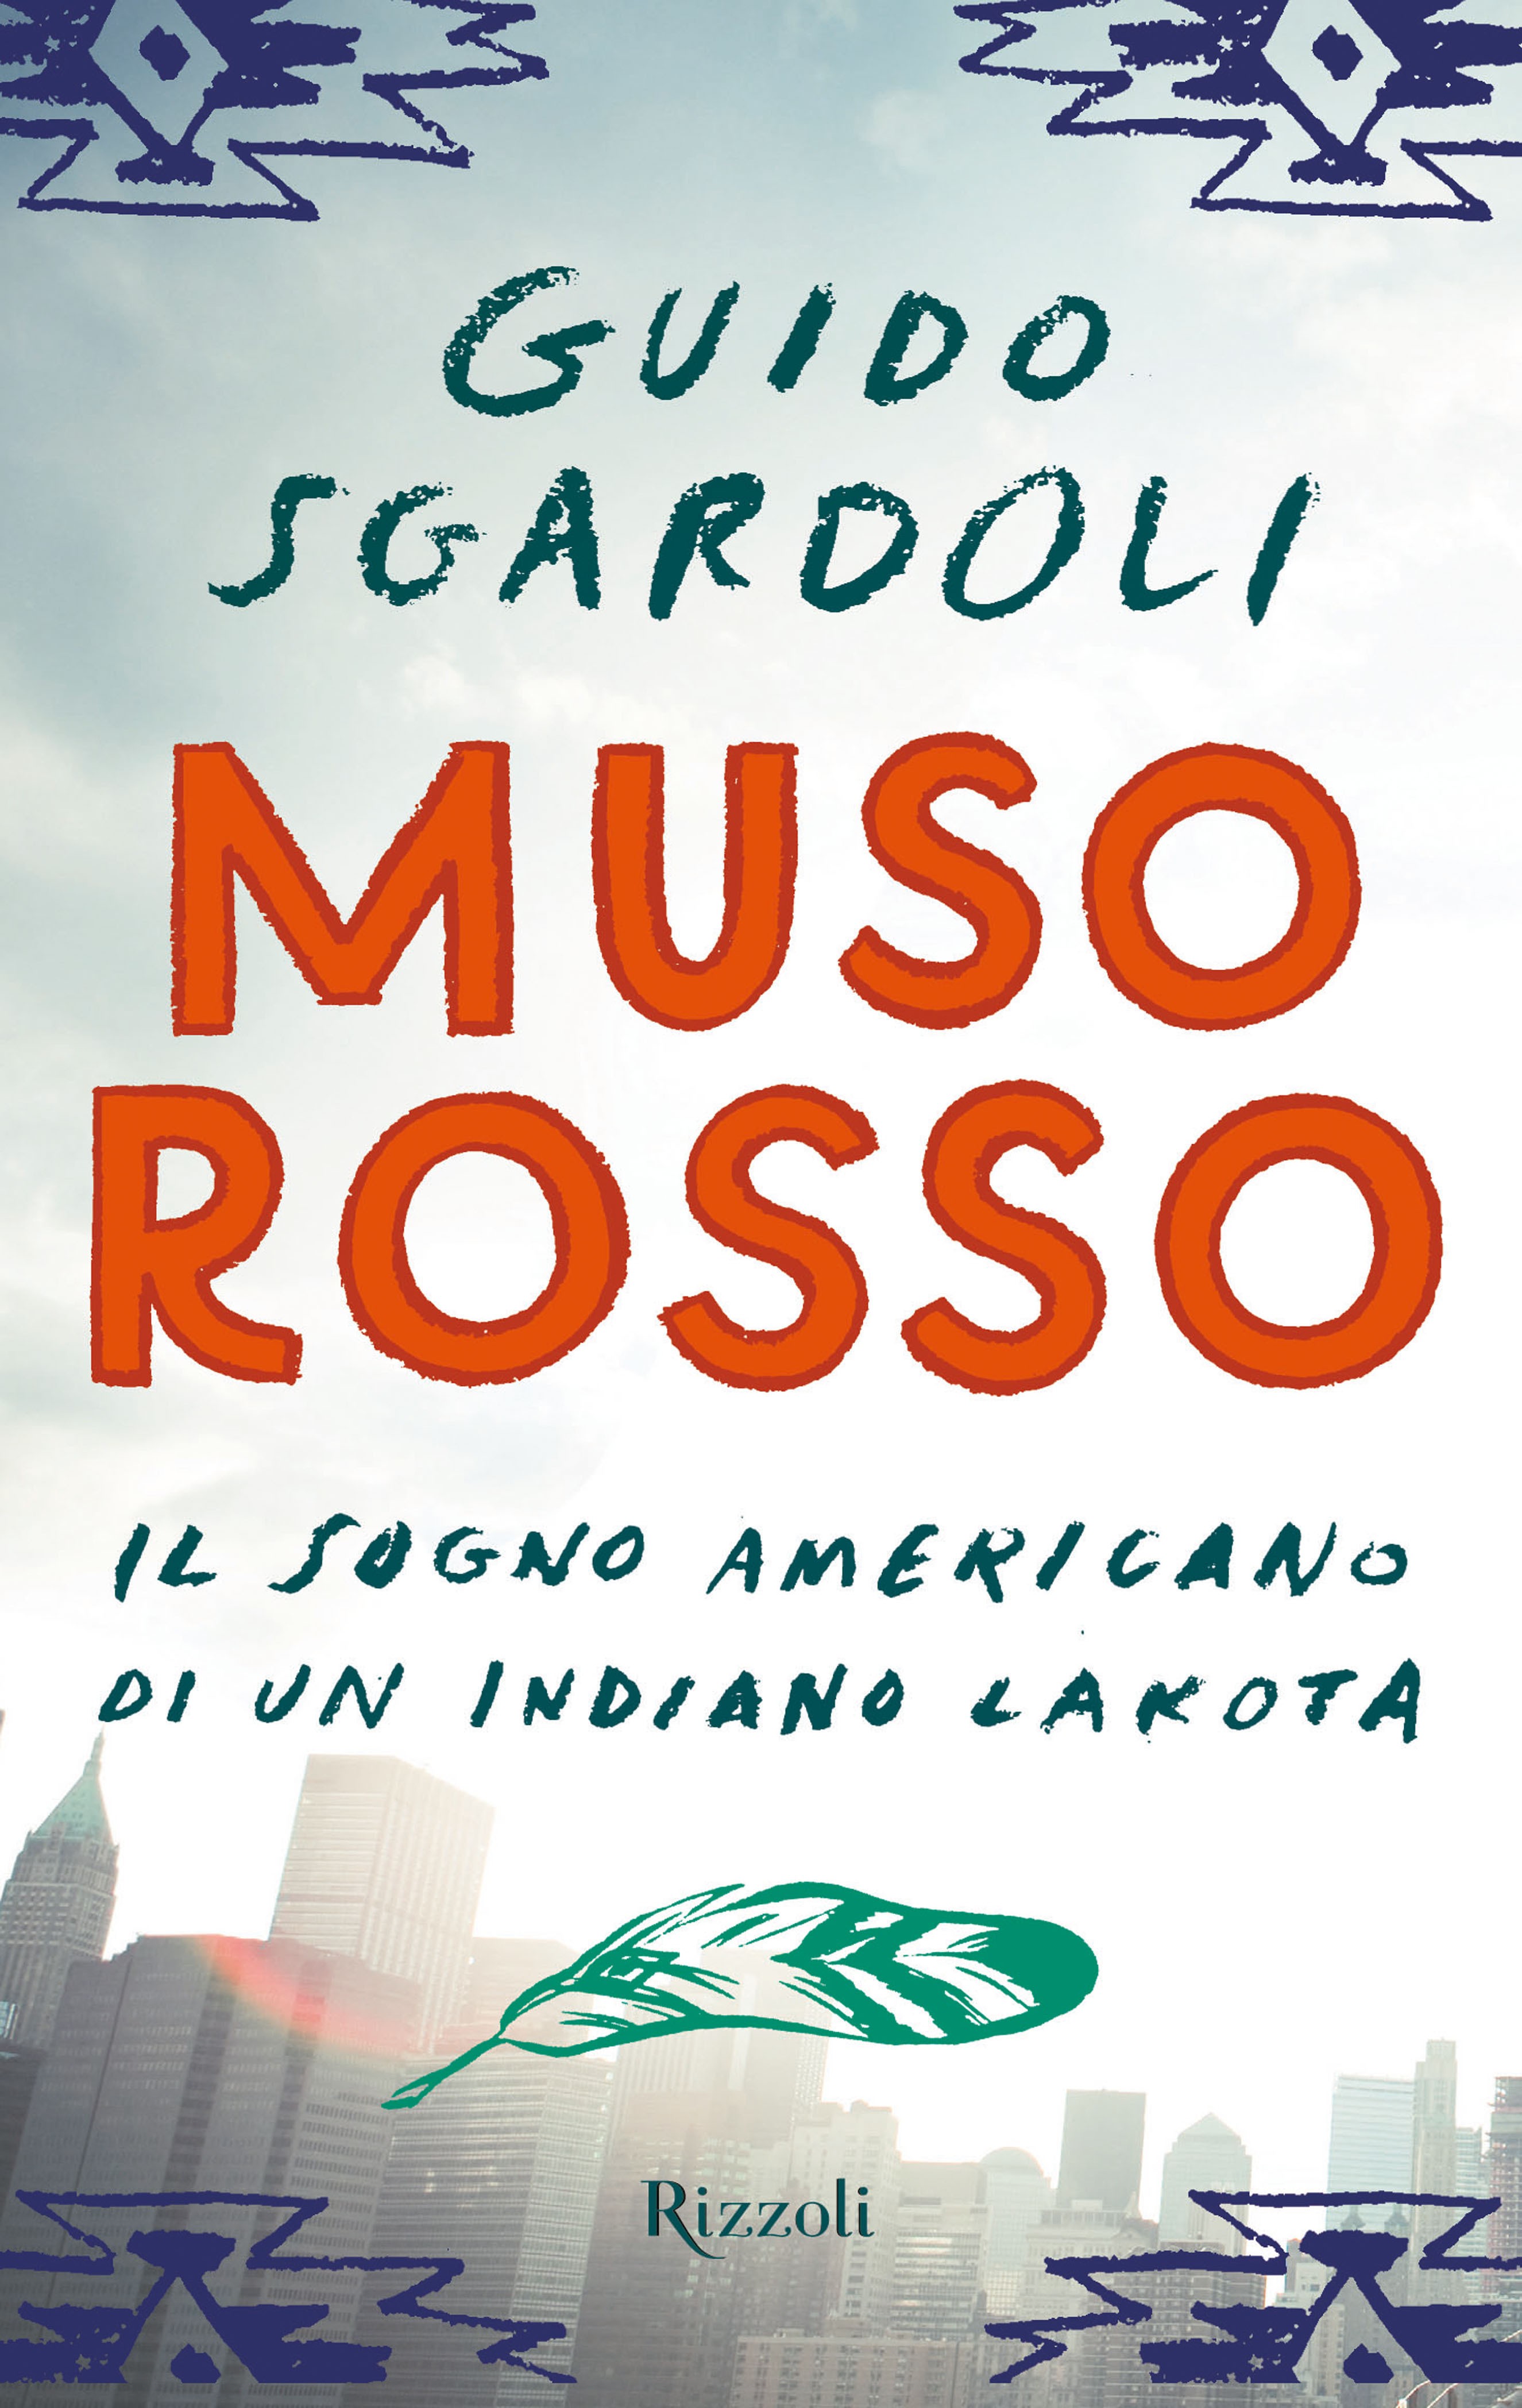 Muso Rosso - Librerie.coop